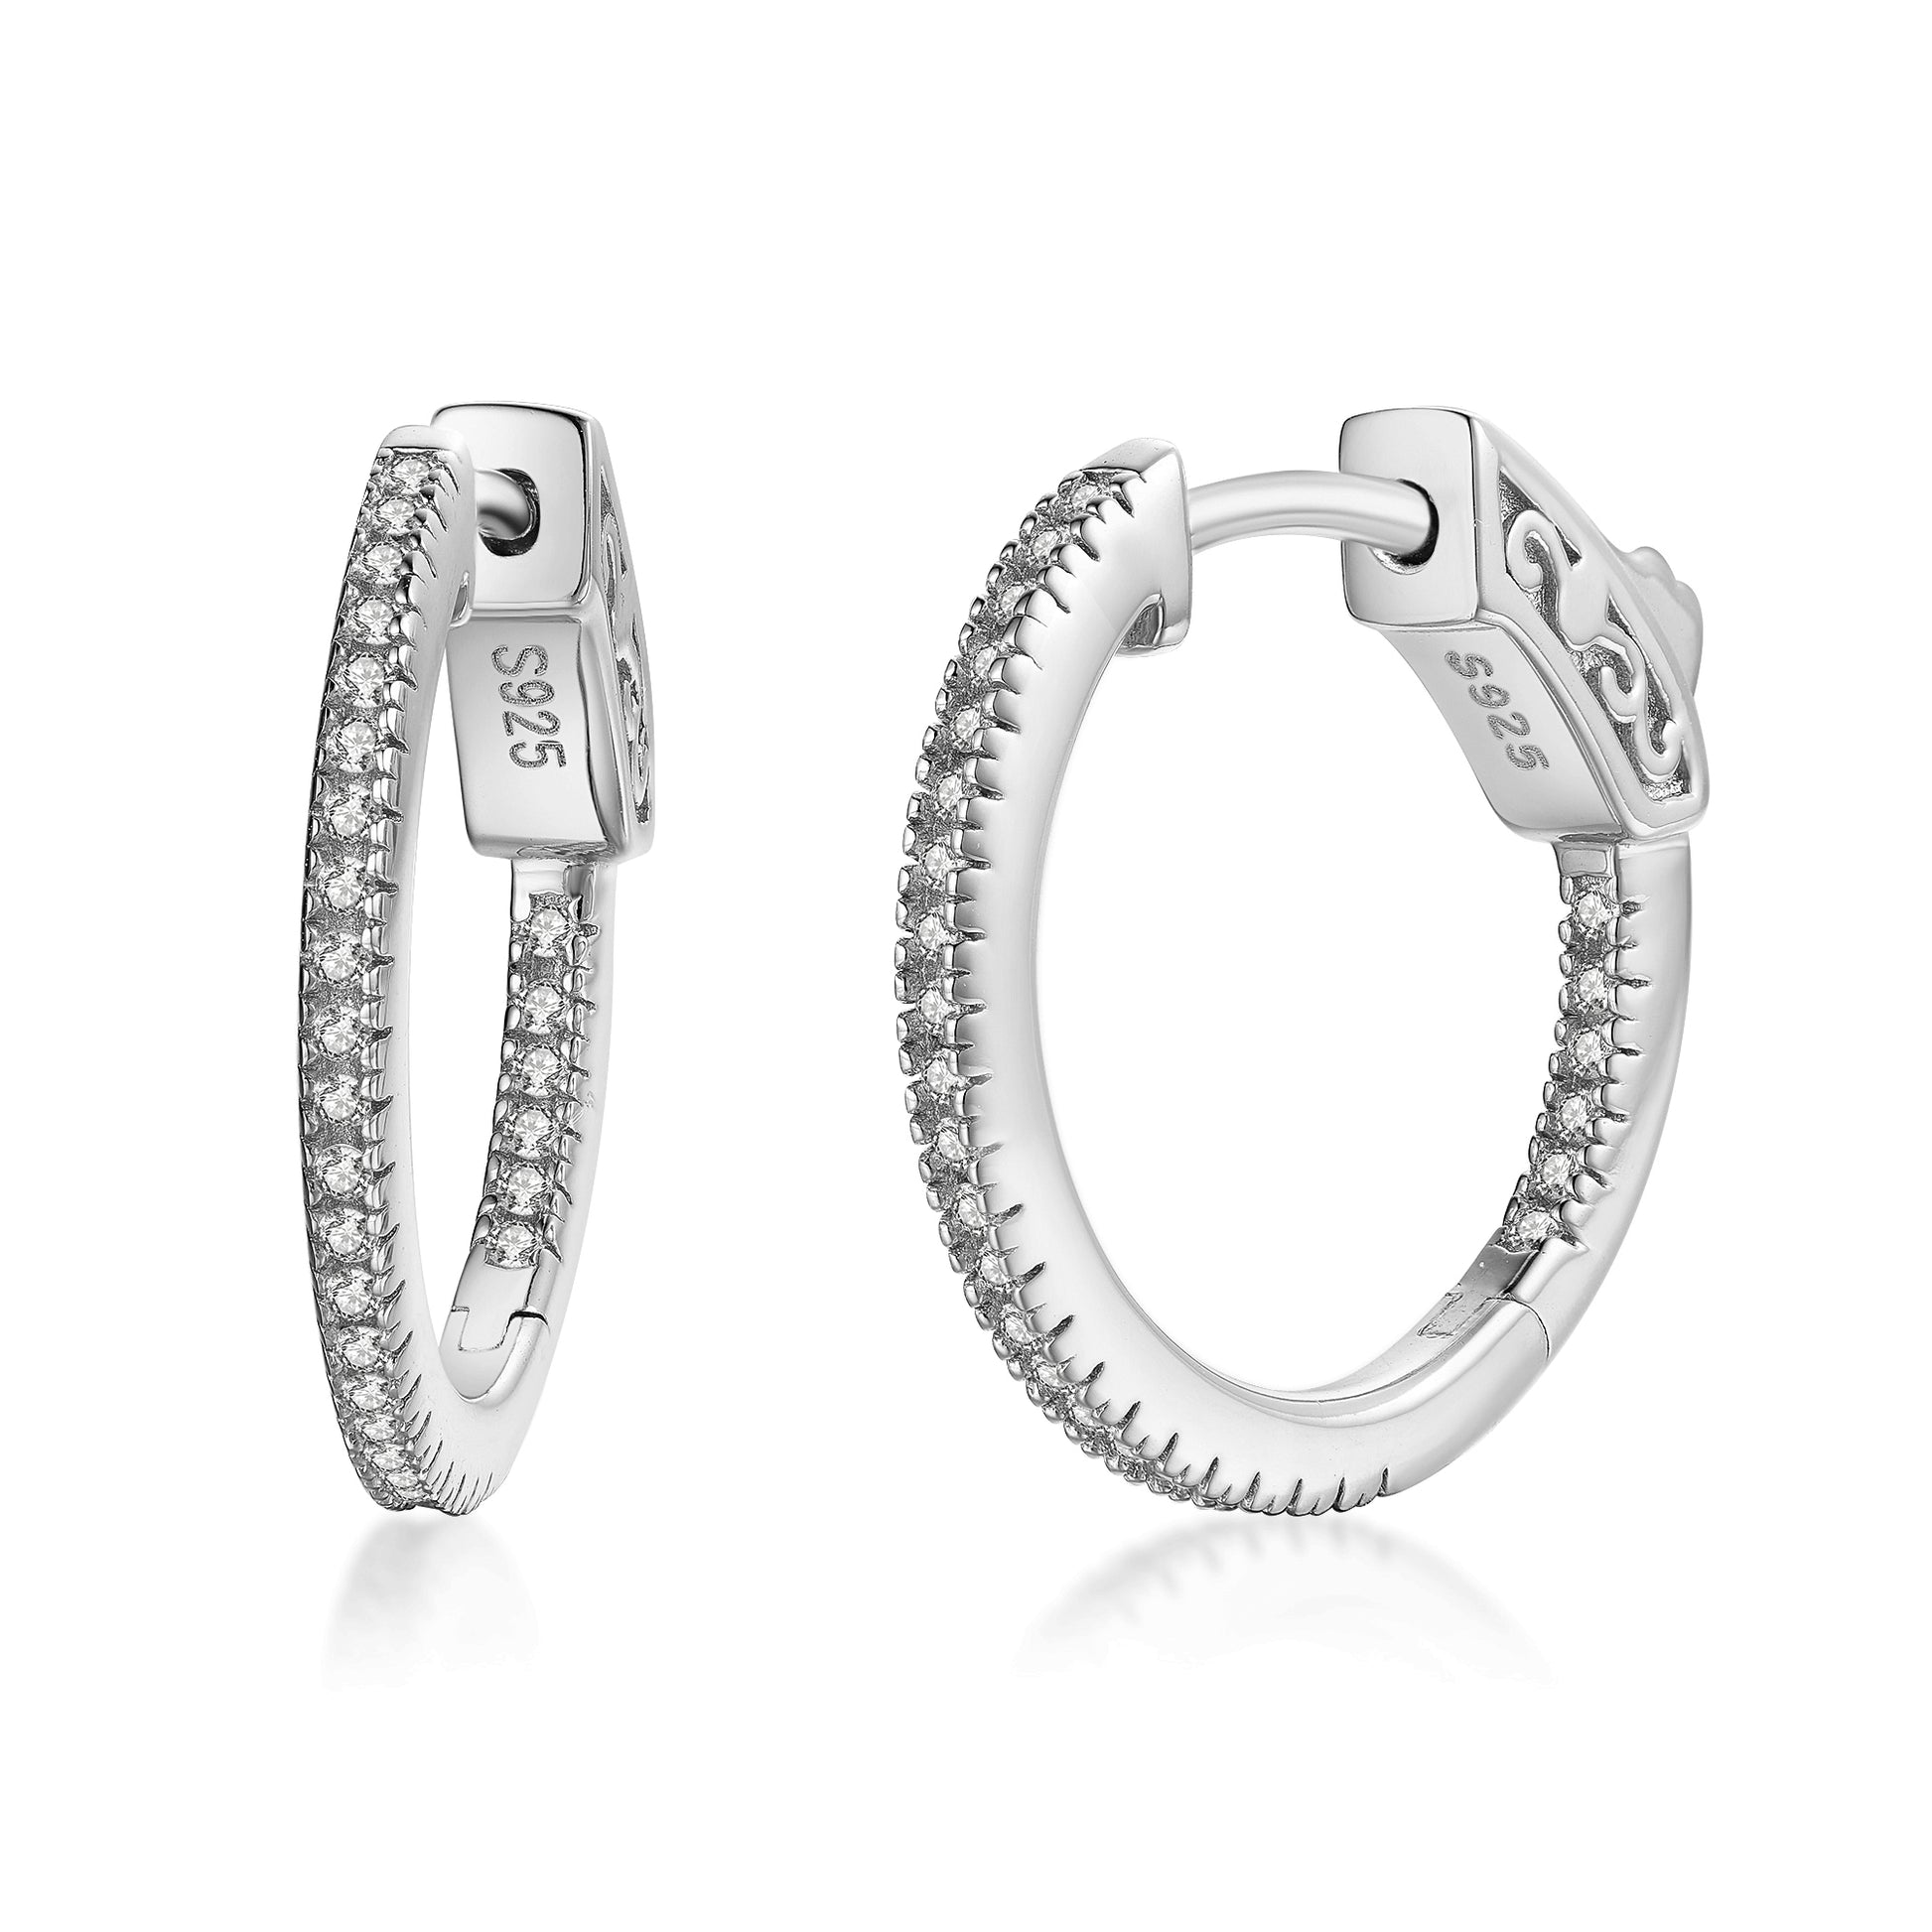 Sterling Silver 20mm Round CZ Hoop Earrings with 1mm CZs - HK Jewels